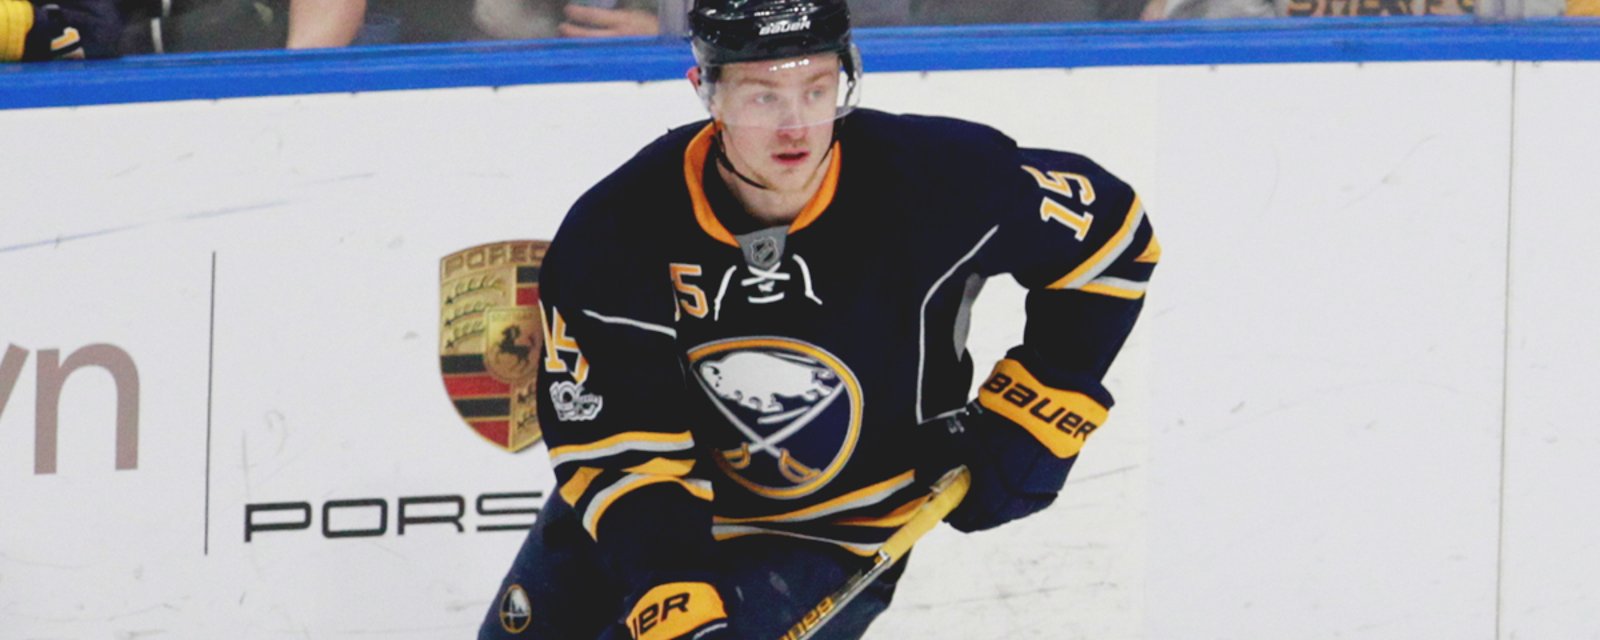 BREAKING: Jack Eichel’s agent responds to the MAJOR trade rumor involving his client.